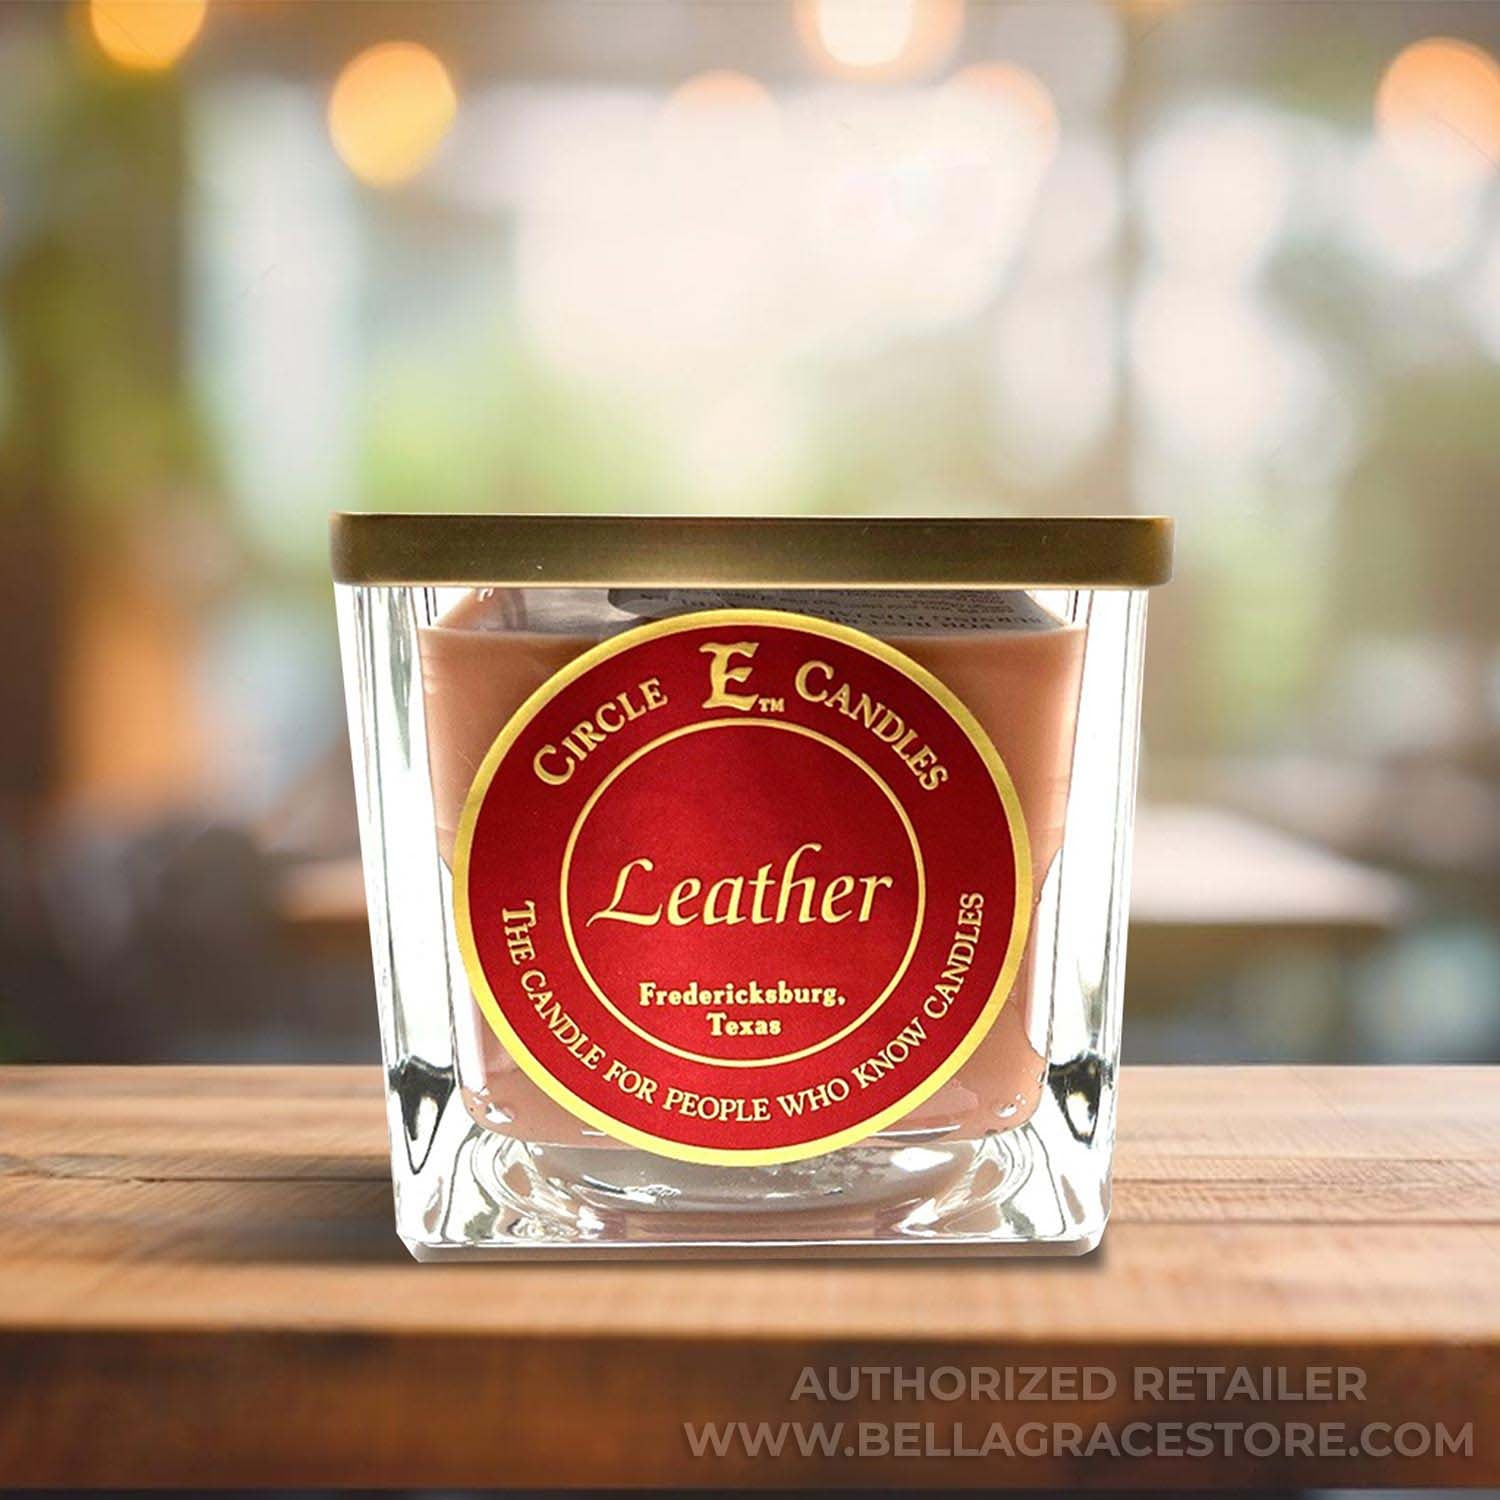 Circle E Candles, Leather Scent, Large Size Jar Candle, 43oz, 4 Wicks